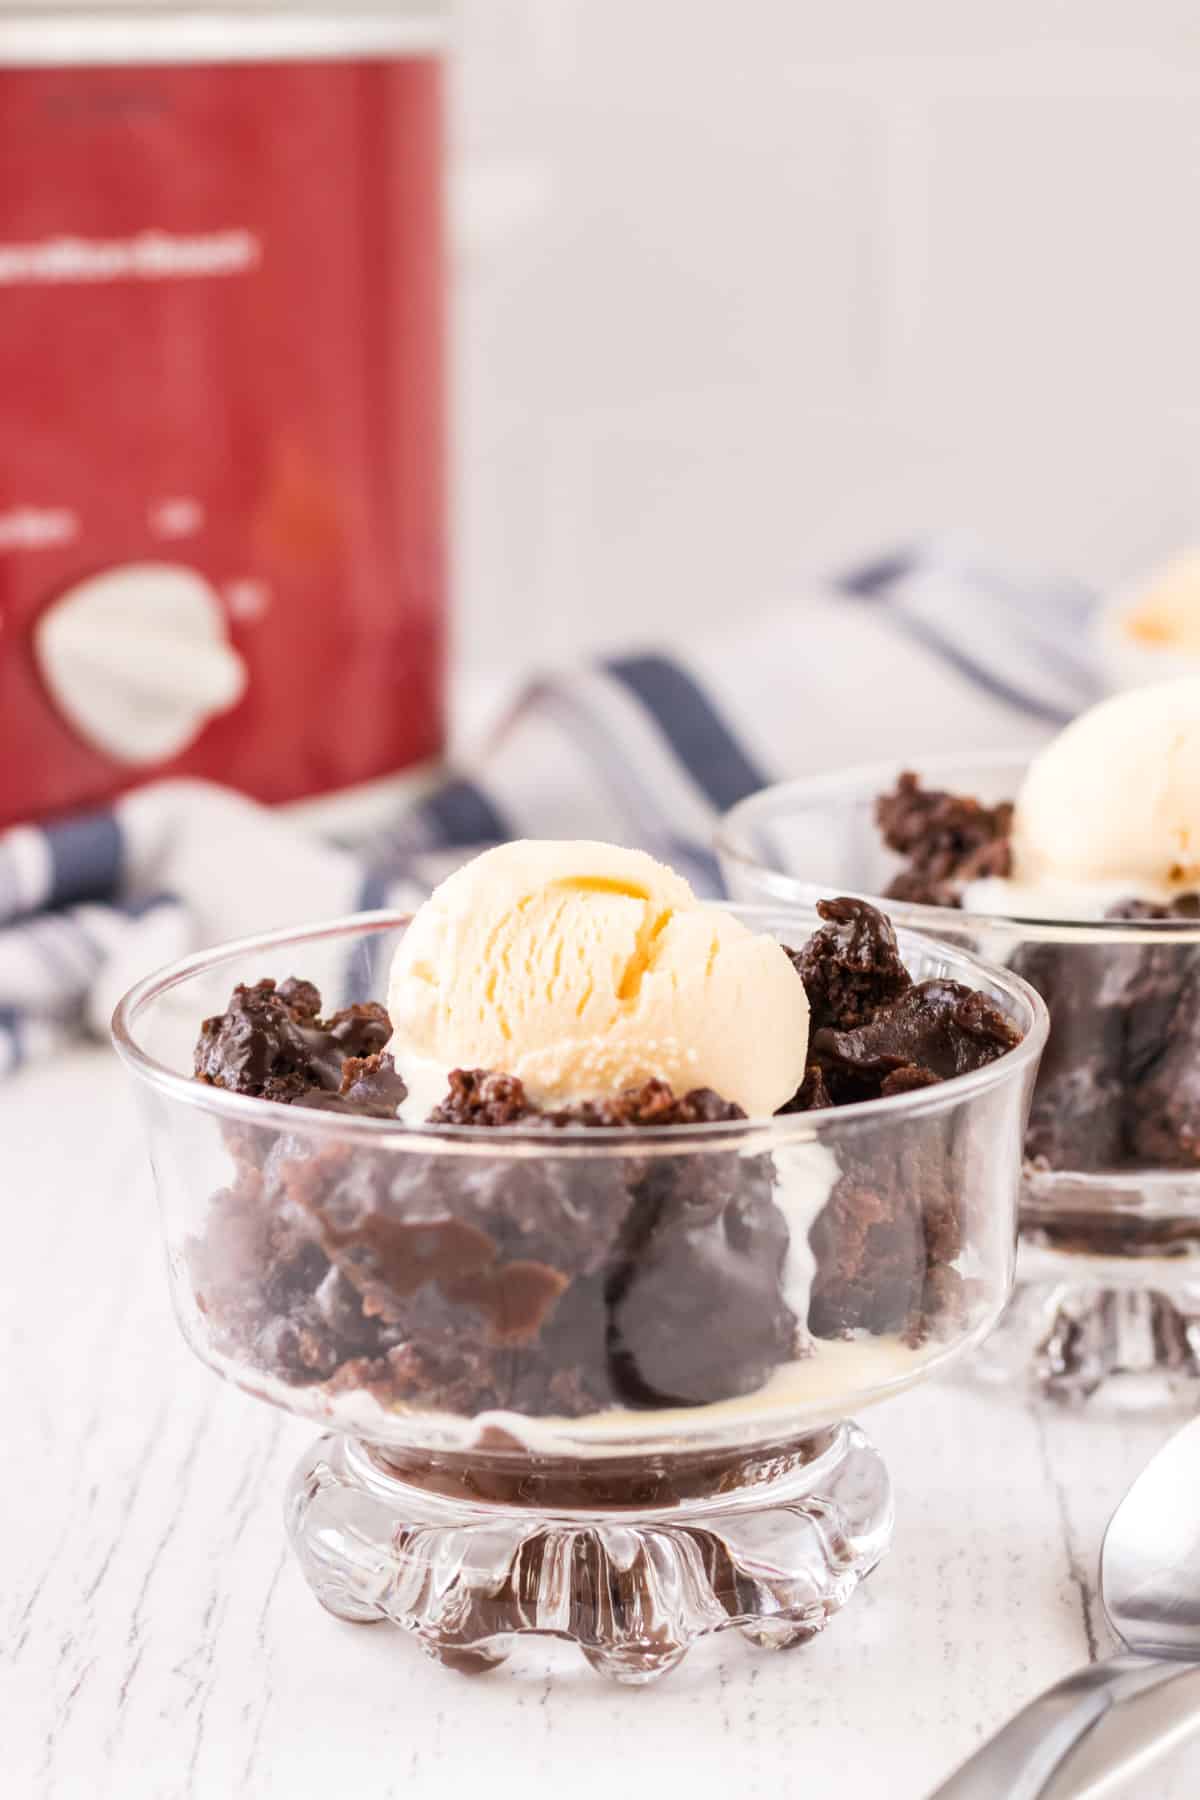 Small glass dish with chocolate pudding cake topped with vanilla ice creamand second bowl, red slow cooker and blue and white linen in background. 